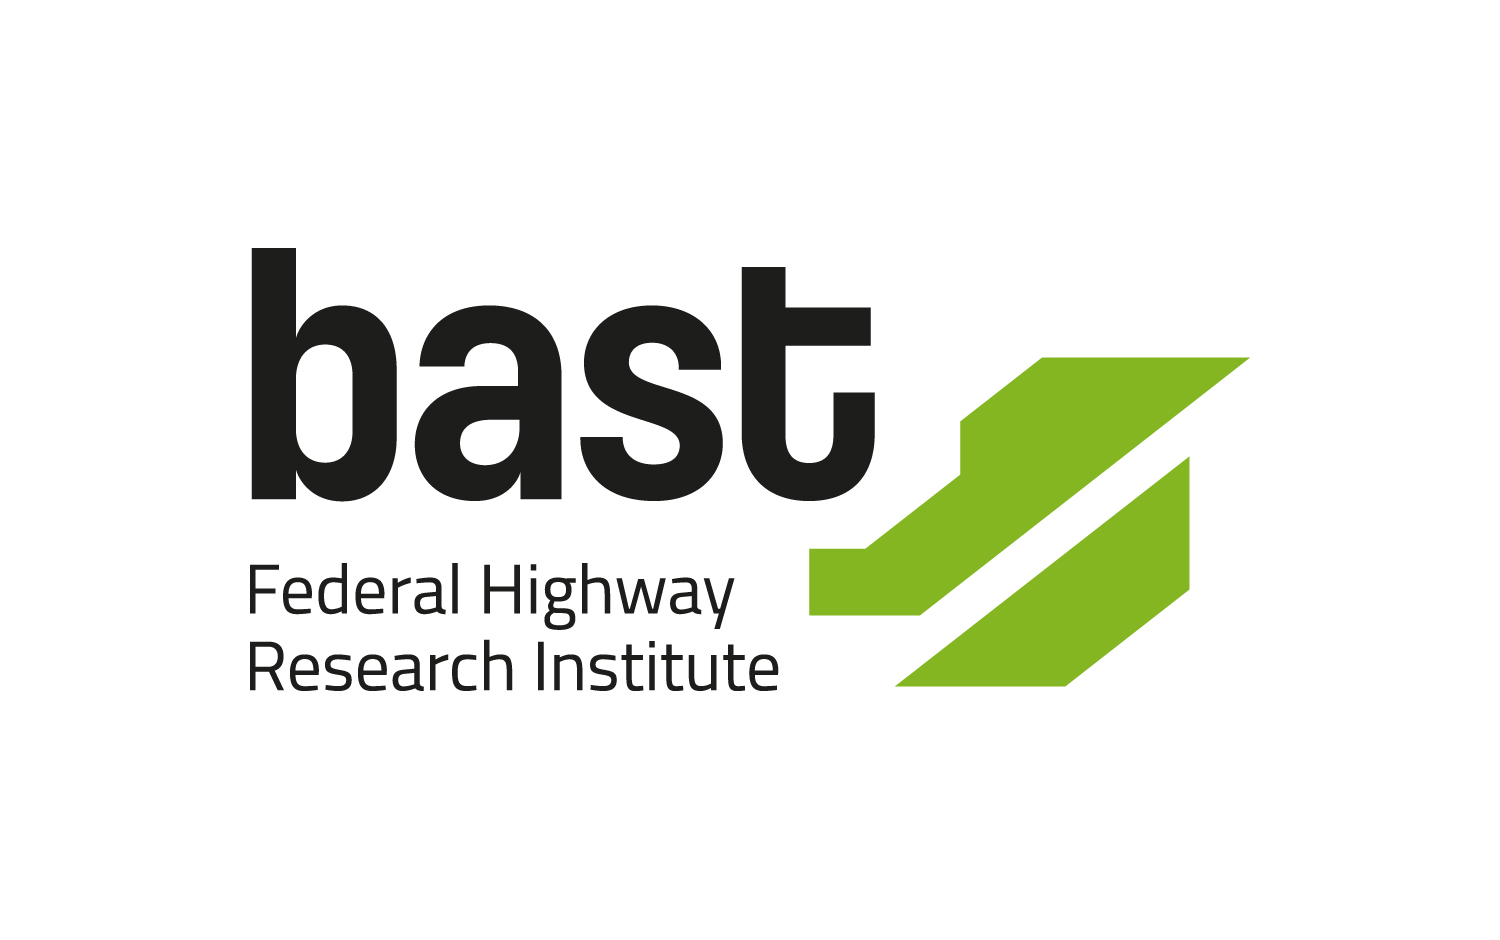 BASt technical report on “Research Needs in Teleoperation”